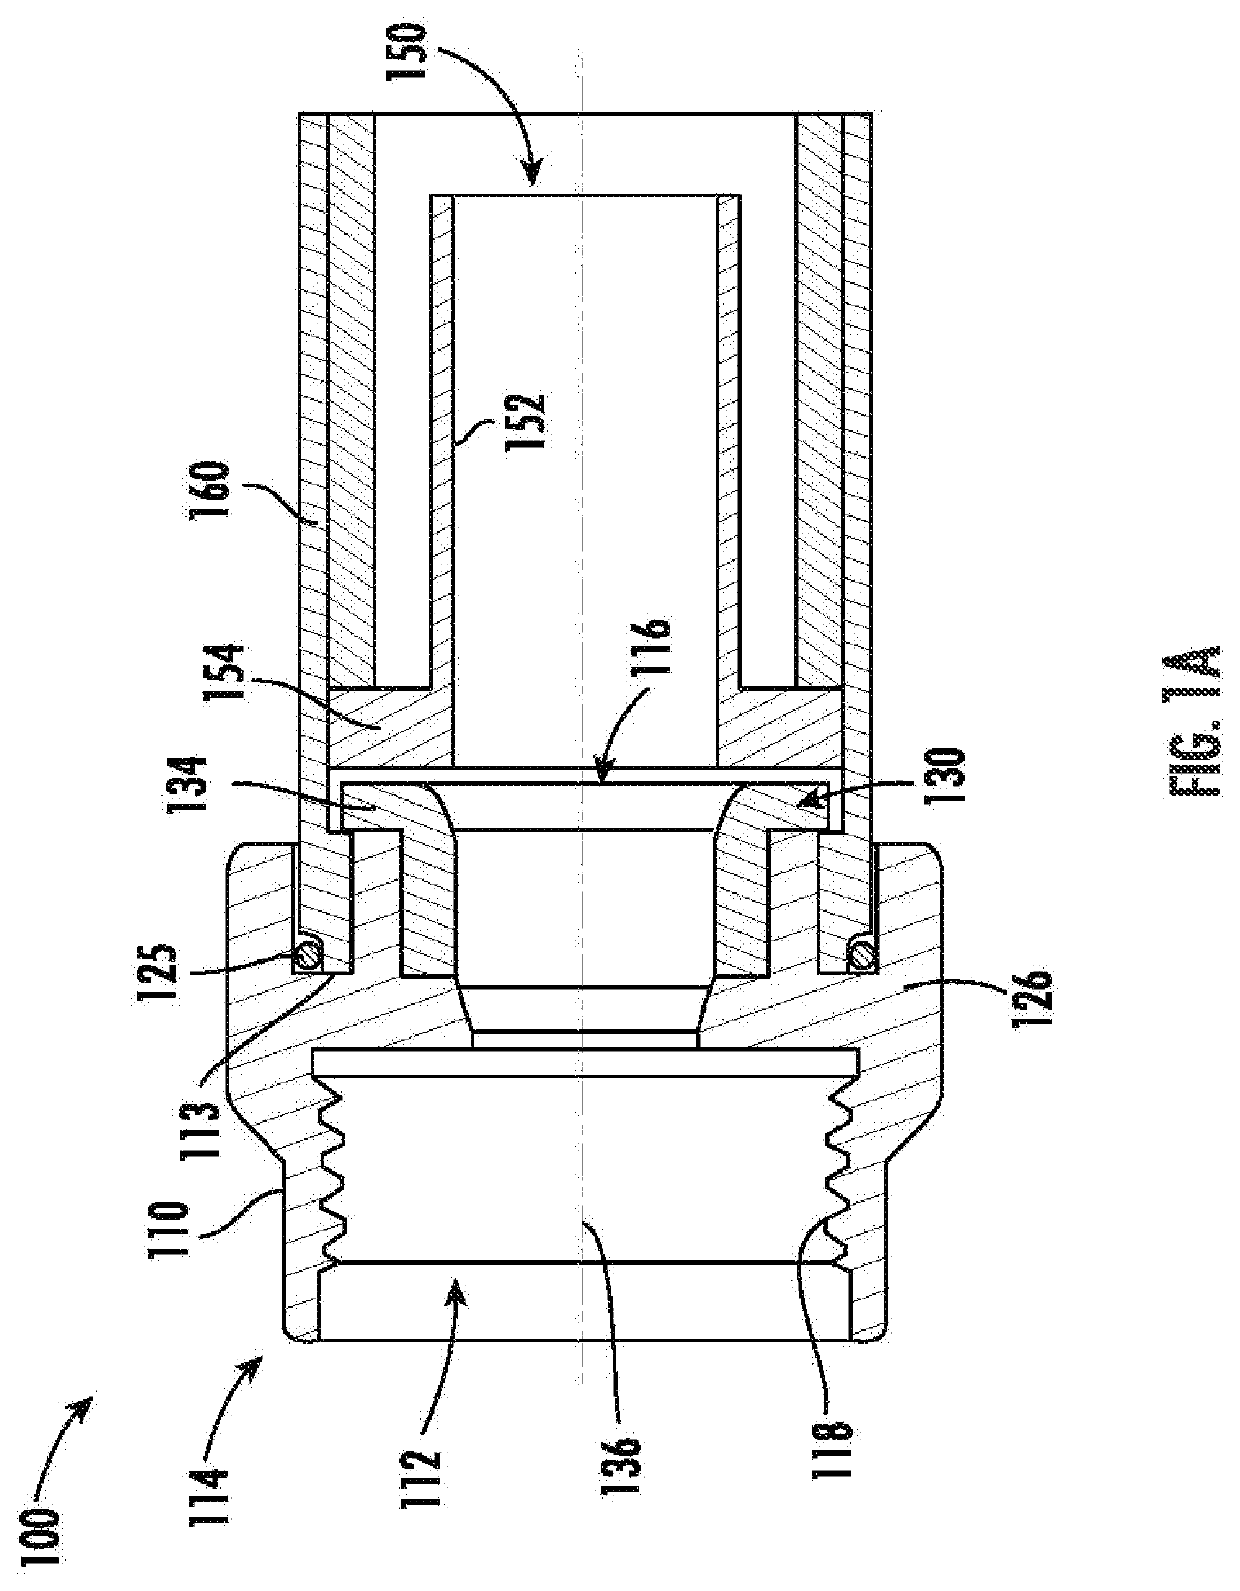 Coaxial cable connector assemblies with outer conductor engagement features and methods for using the same